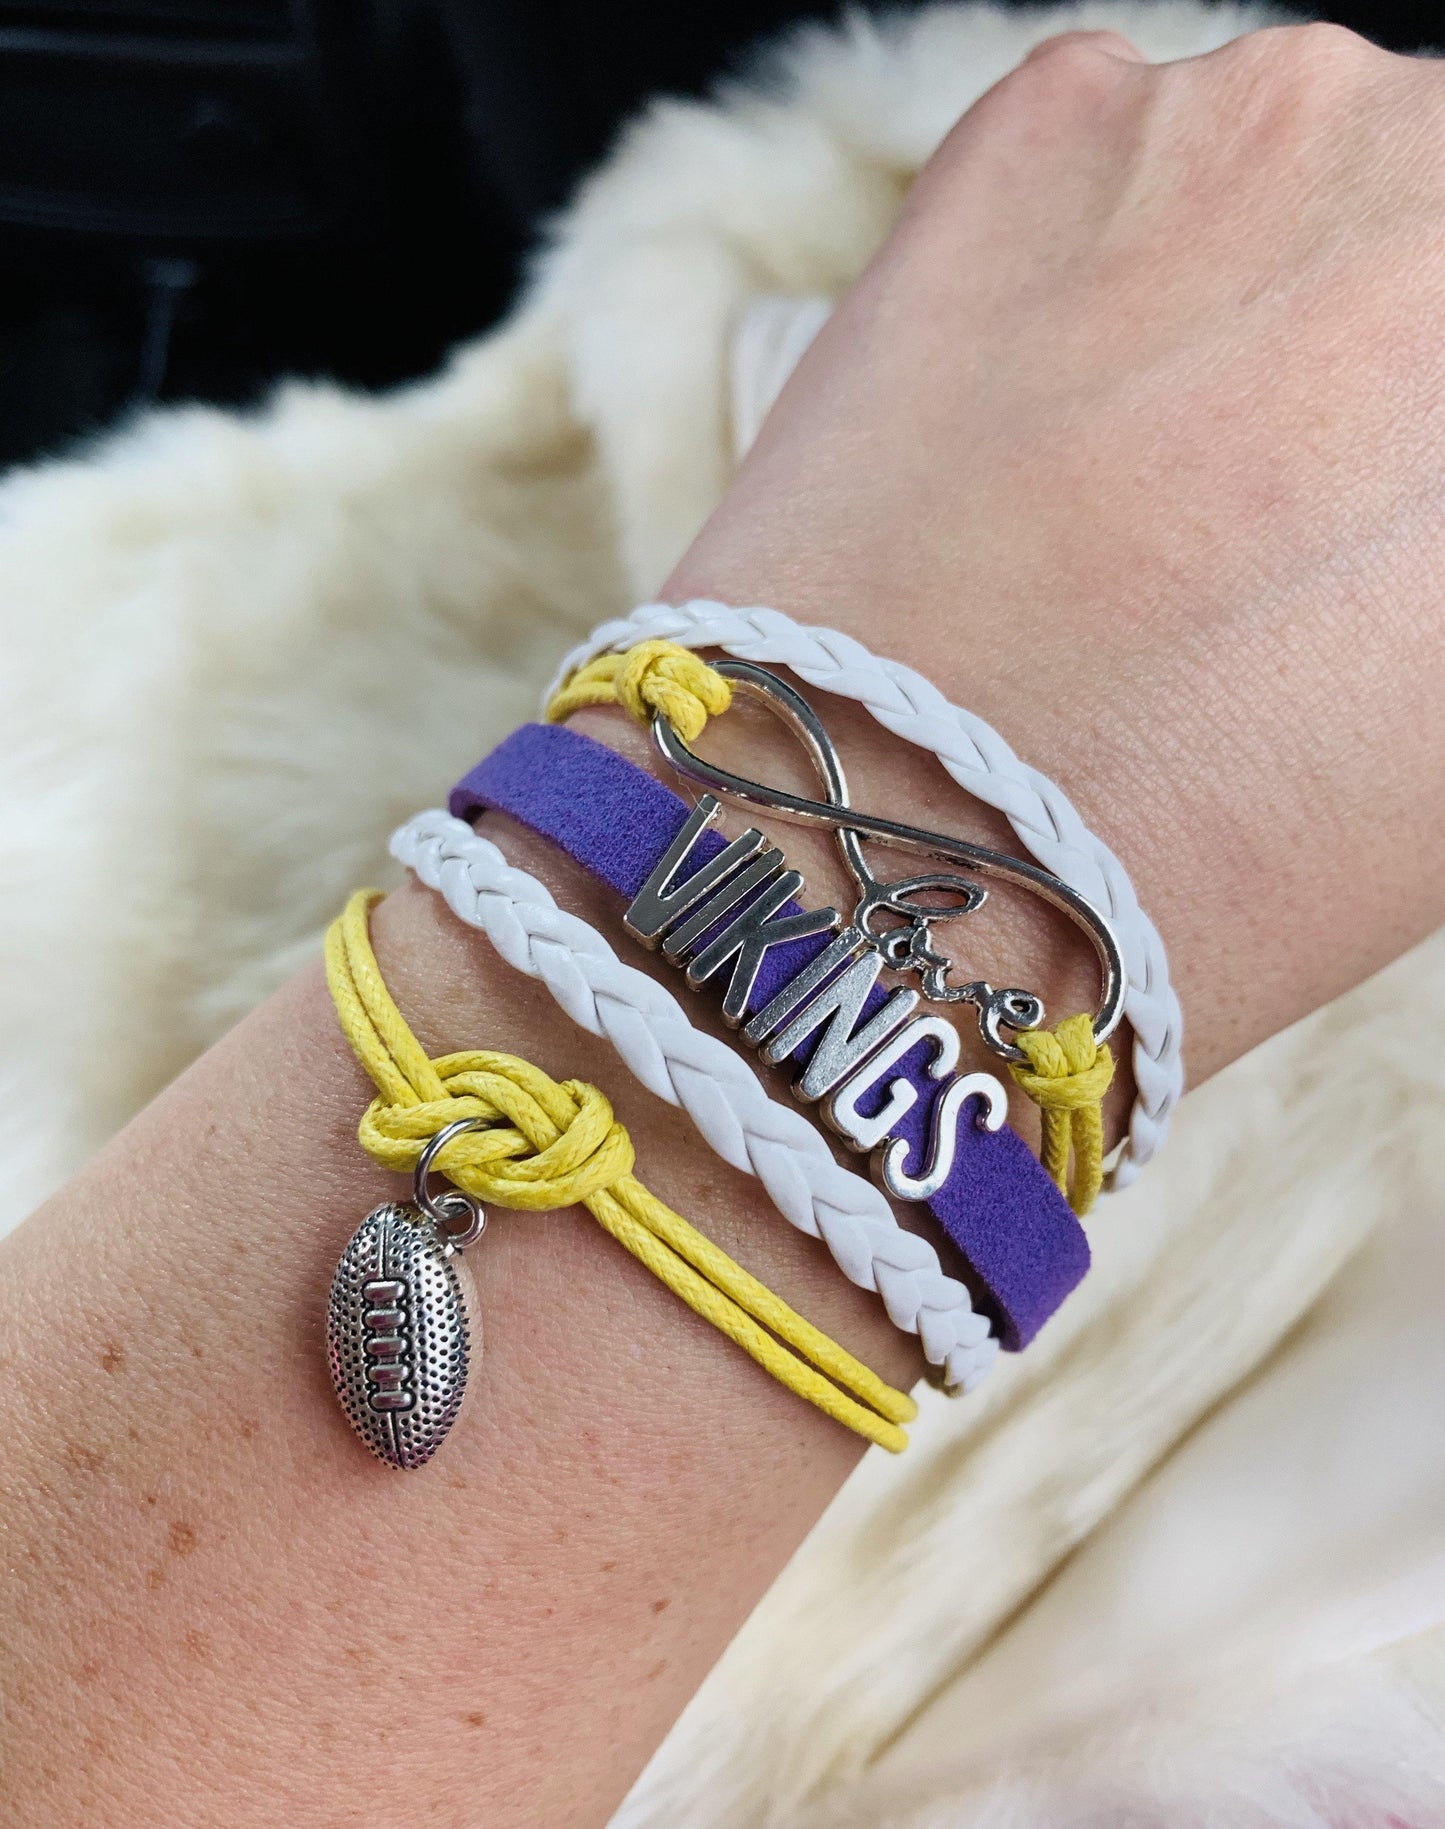 Bracelet { Minnesota Vikings } Unisex • Purple, white and gold • Adjustable lobster clasp with extender • Football • Infinity symbol with love - Stacy's Pink Martini Boutique